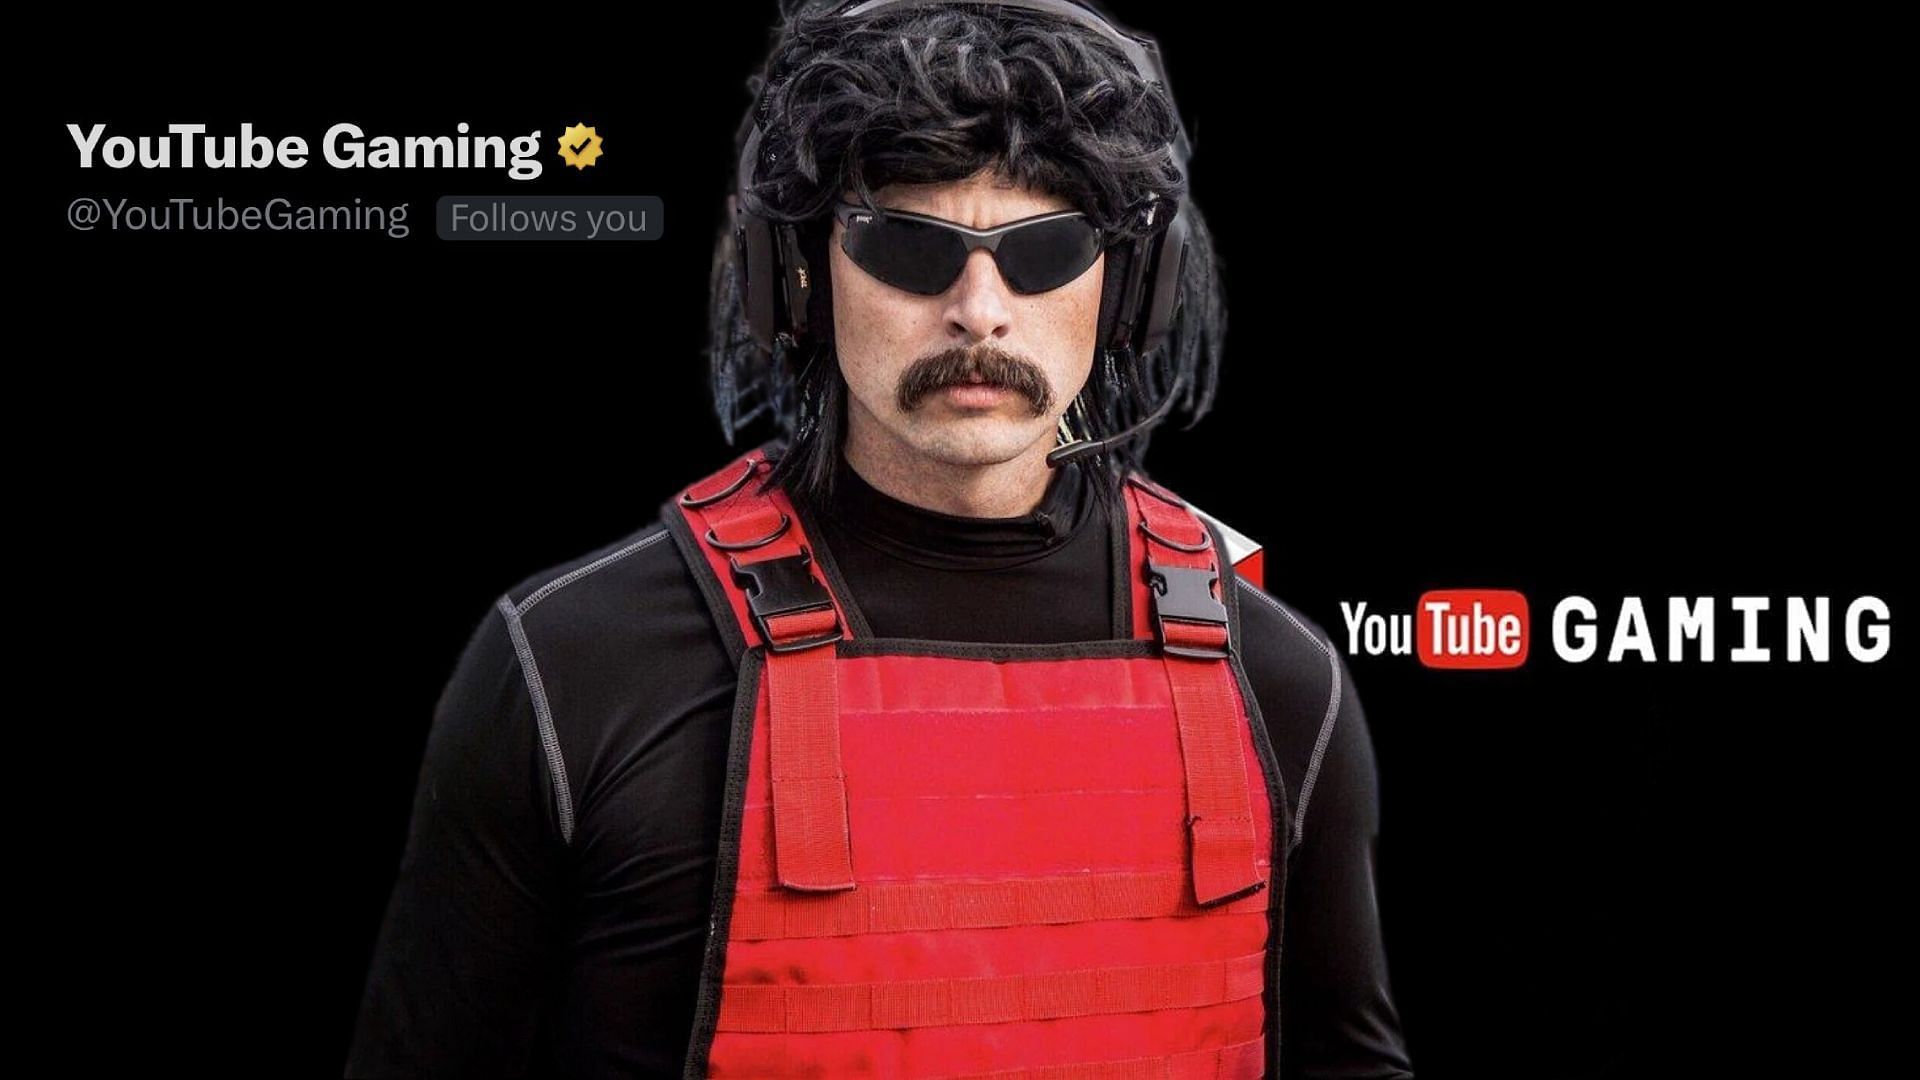 YouTube Gaming followed Dr DisRespect on X, does it mean no Kick deal? (Image via YouTube)